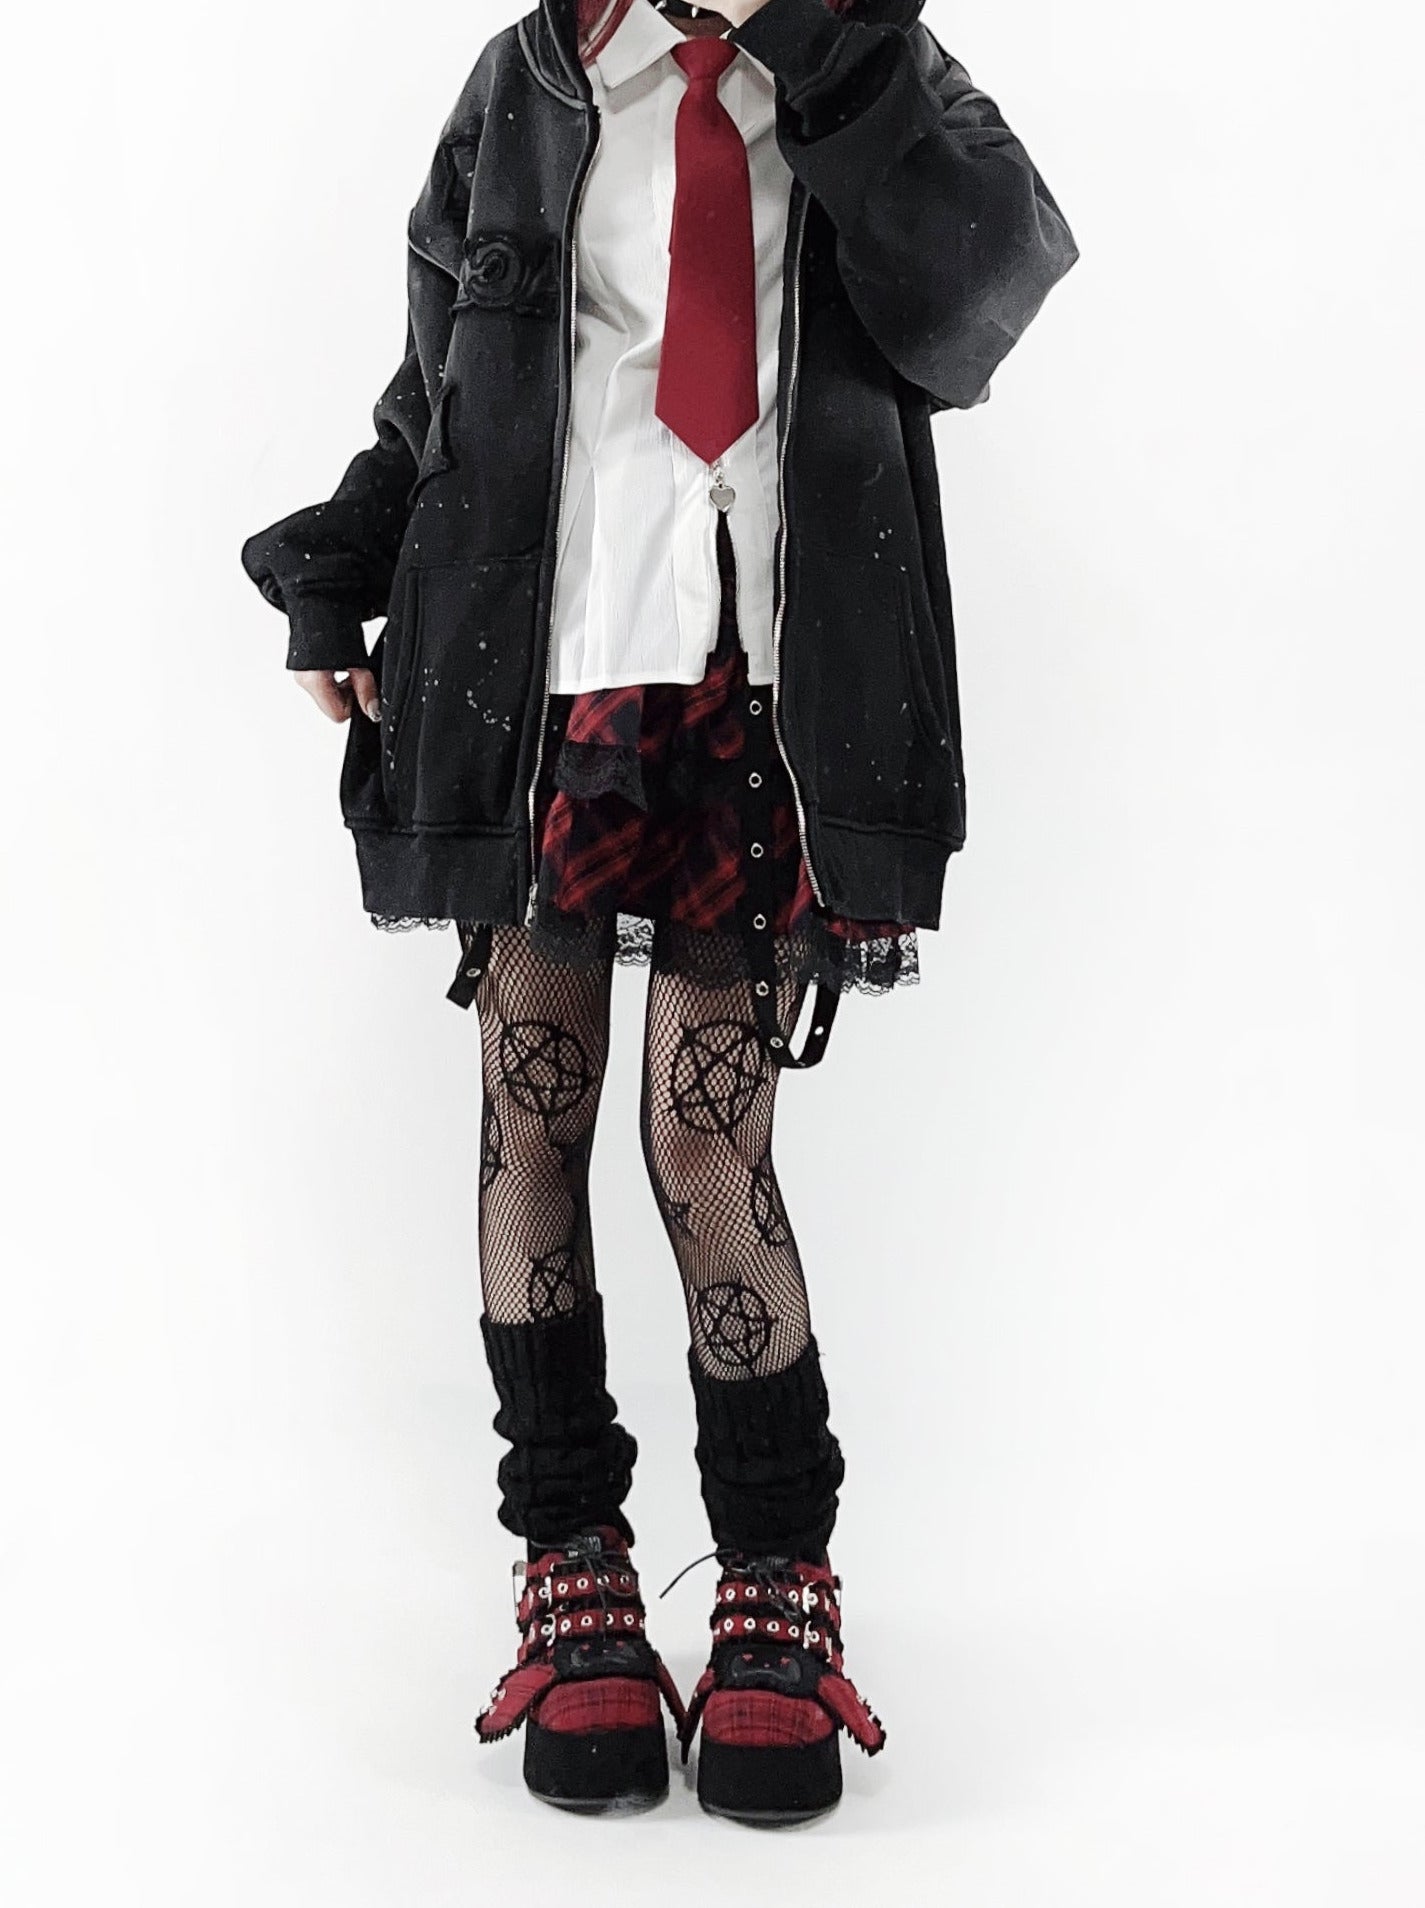 Dark Bunny Red Check Platform Shoes [All Red, Black Red].